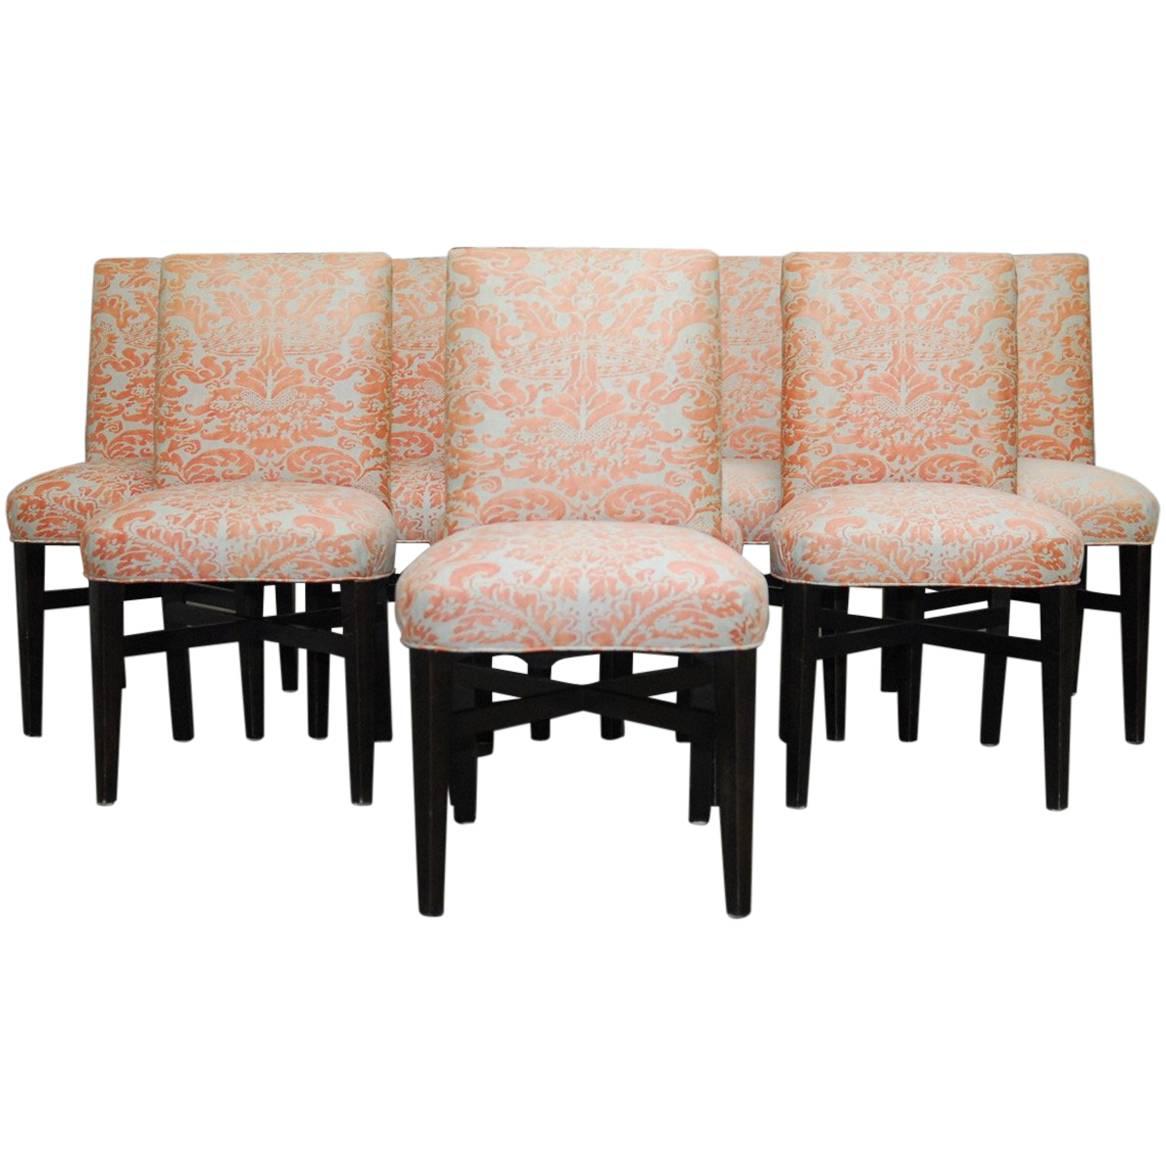 Set of Eight Fortuny Corone Upholstered Dining Chairs